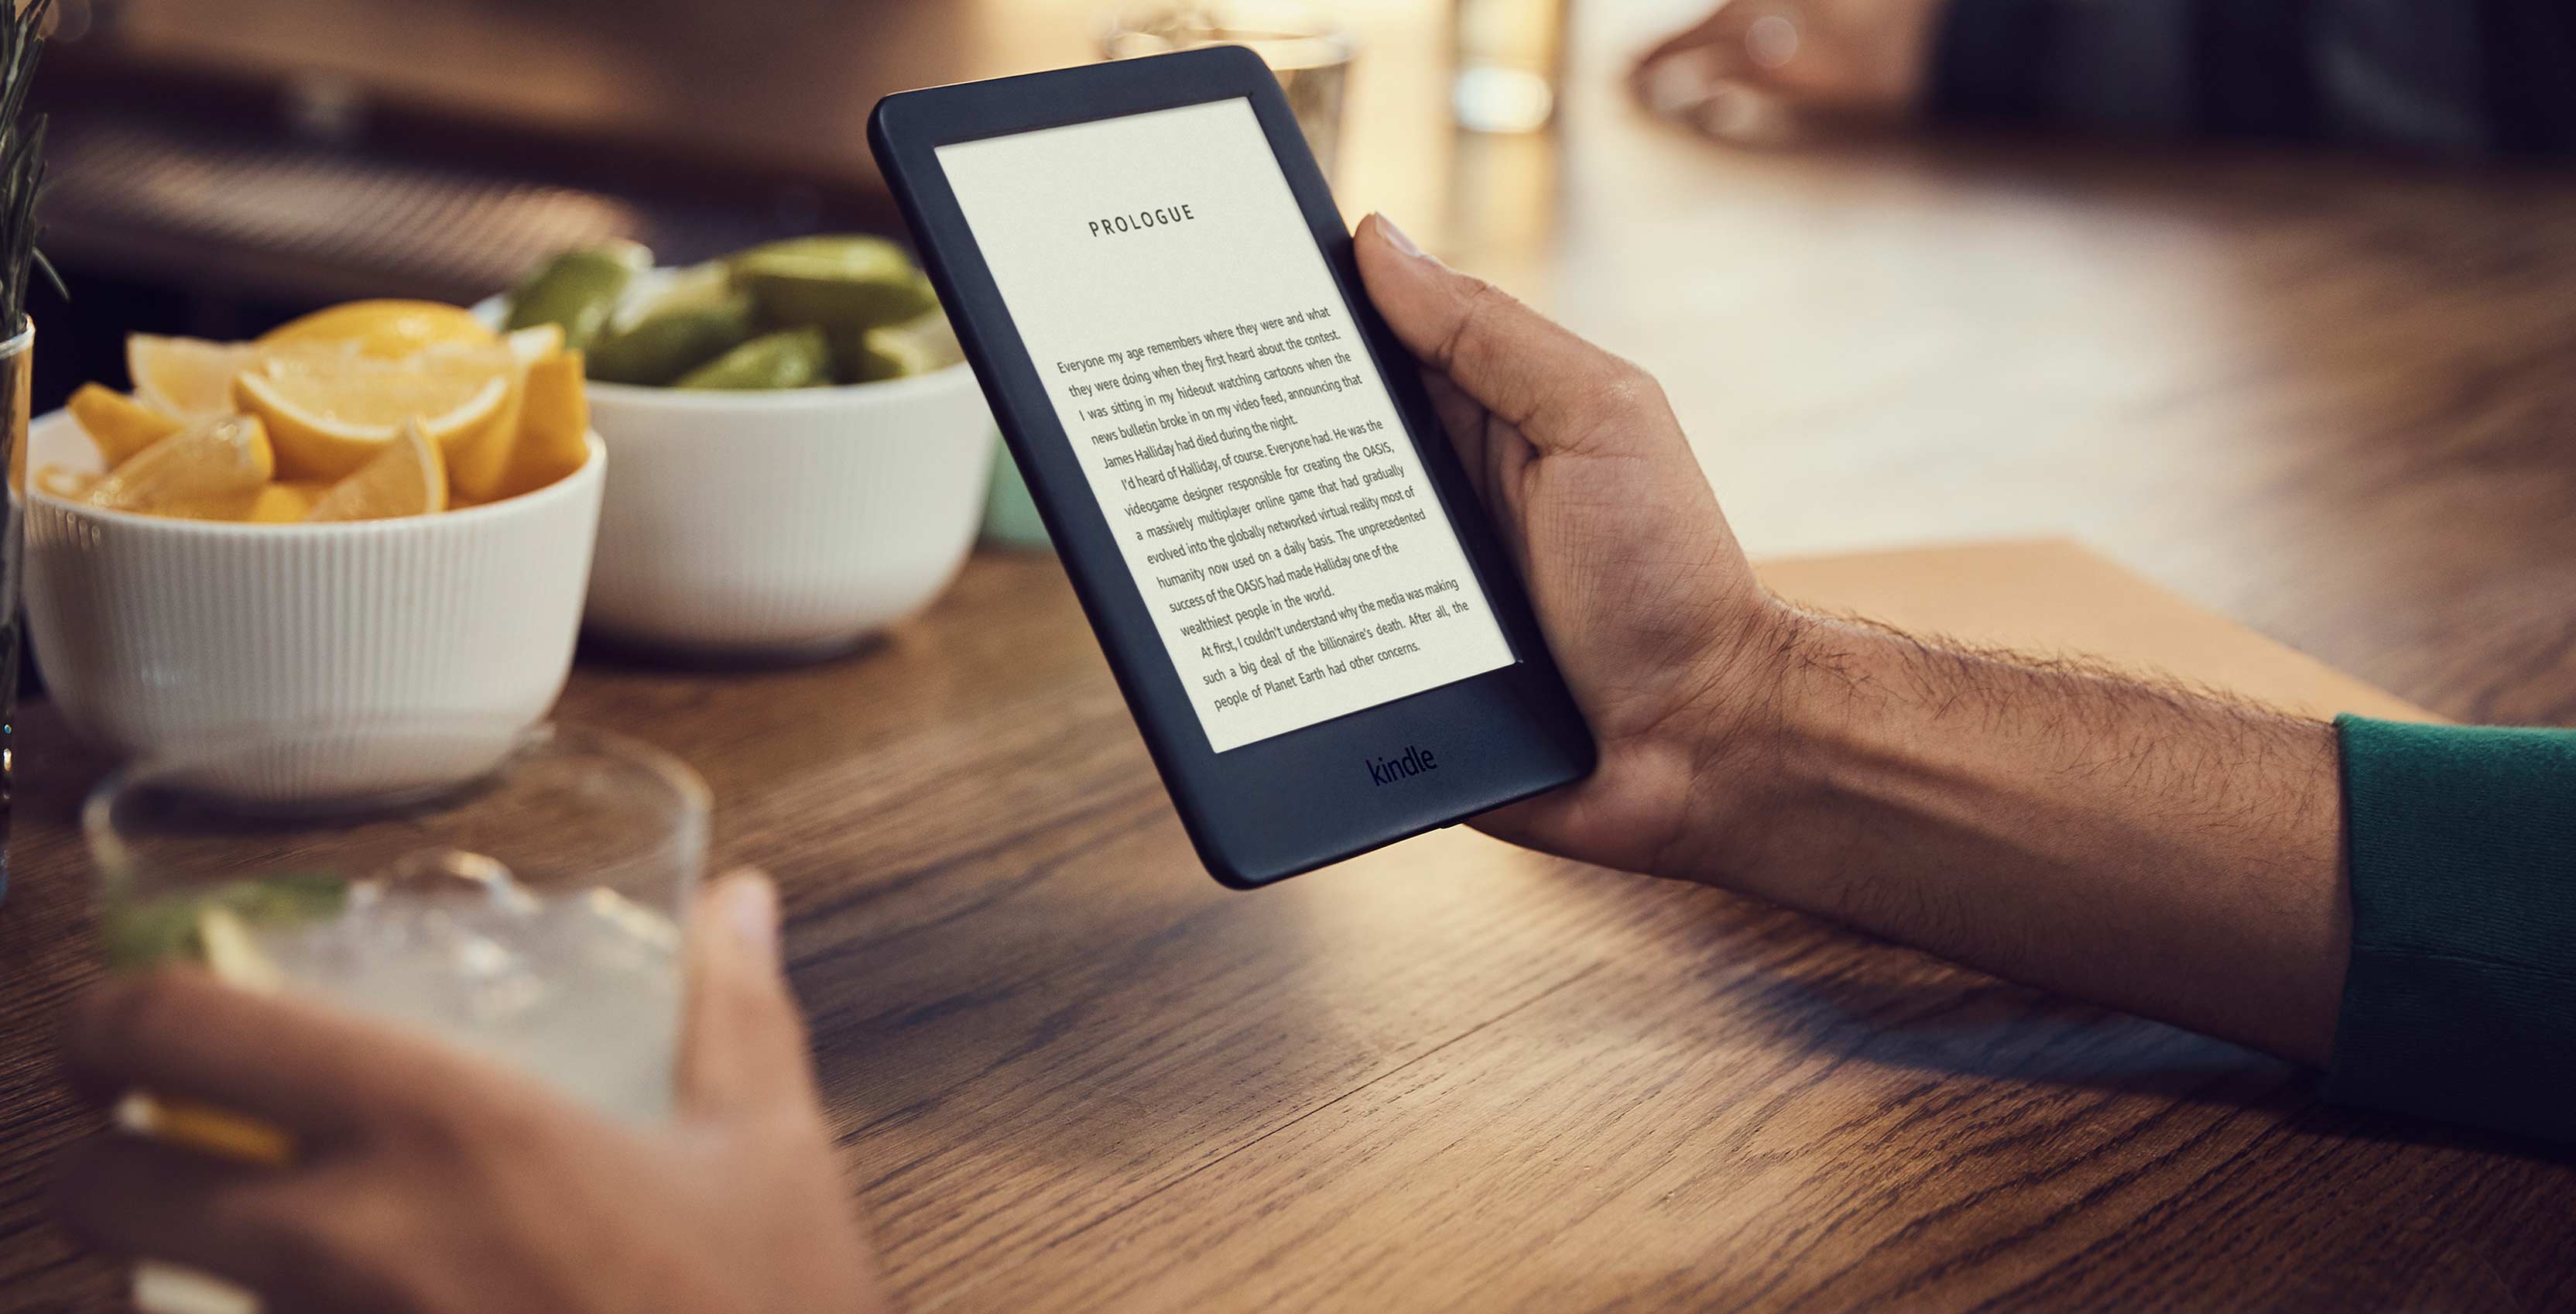 The new Amazon Kindle with adjustable front light